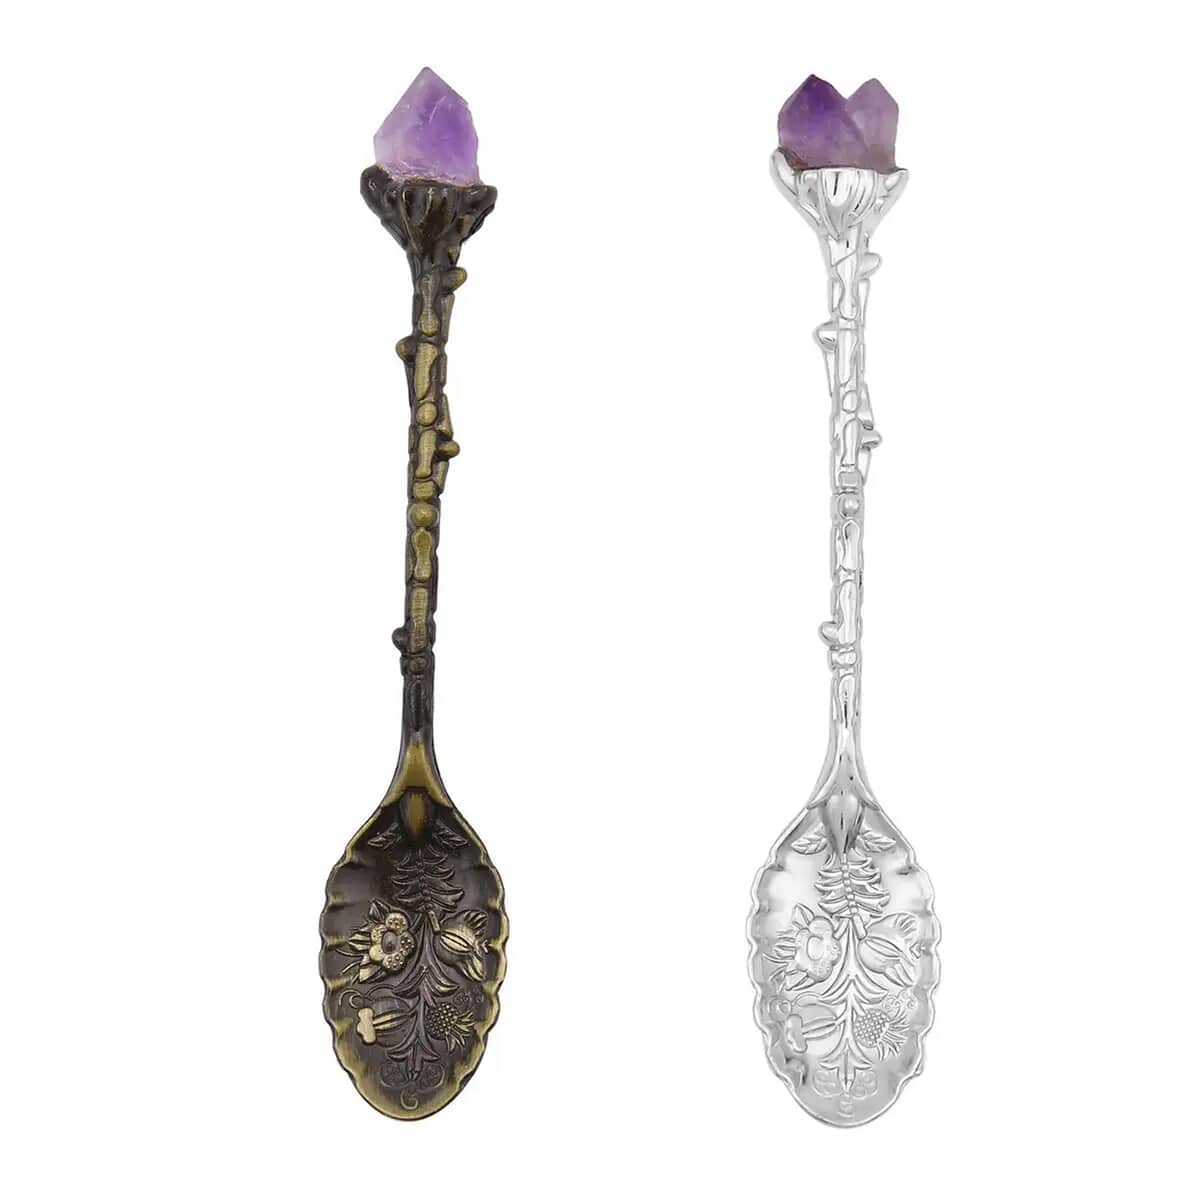 Buy 2pcs Hand Carved Natural Amethyst Deco Set in Silvertone & Bronze ...